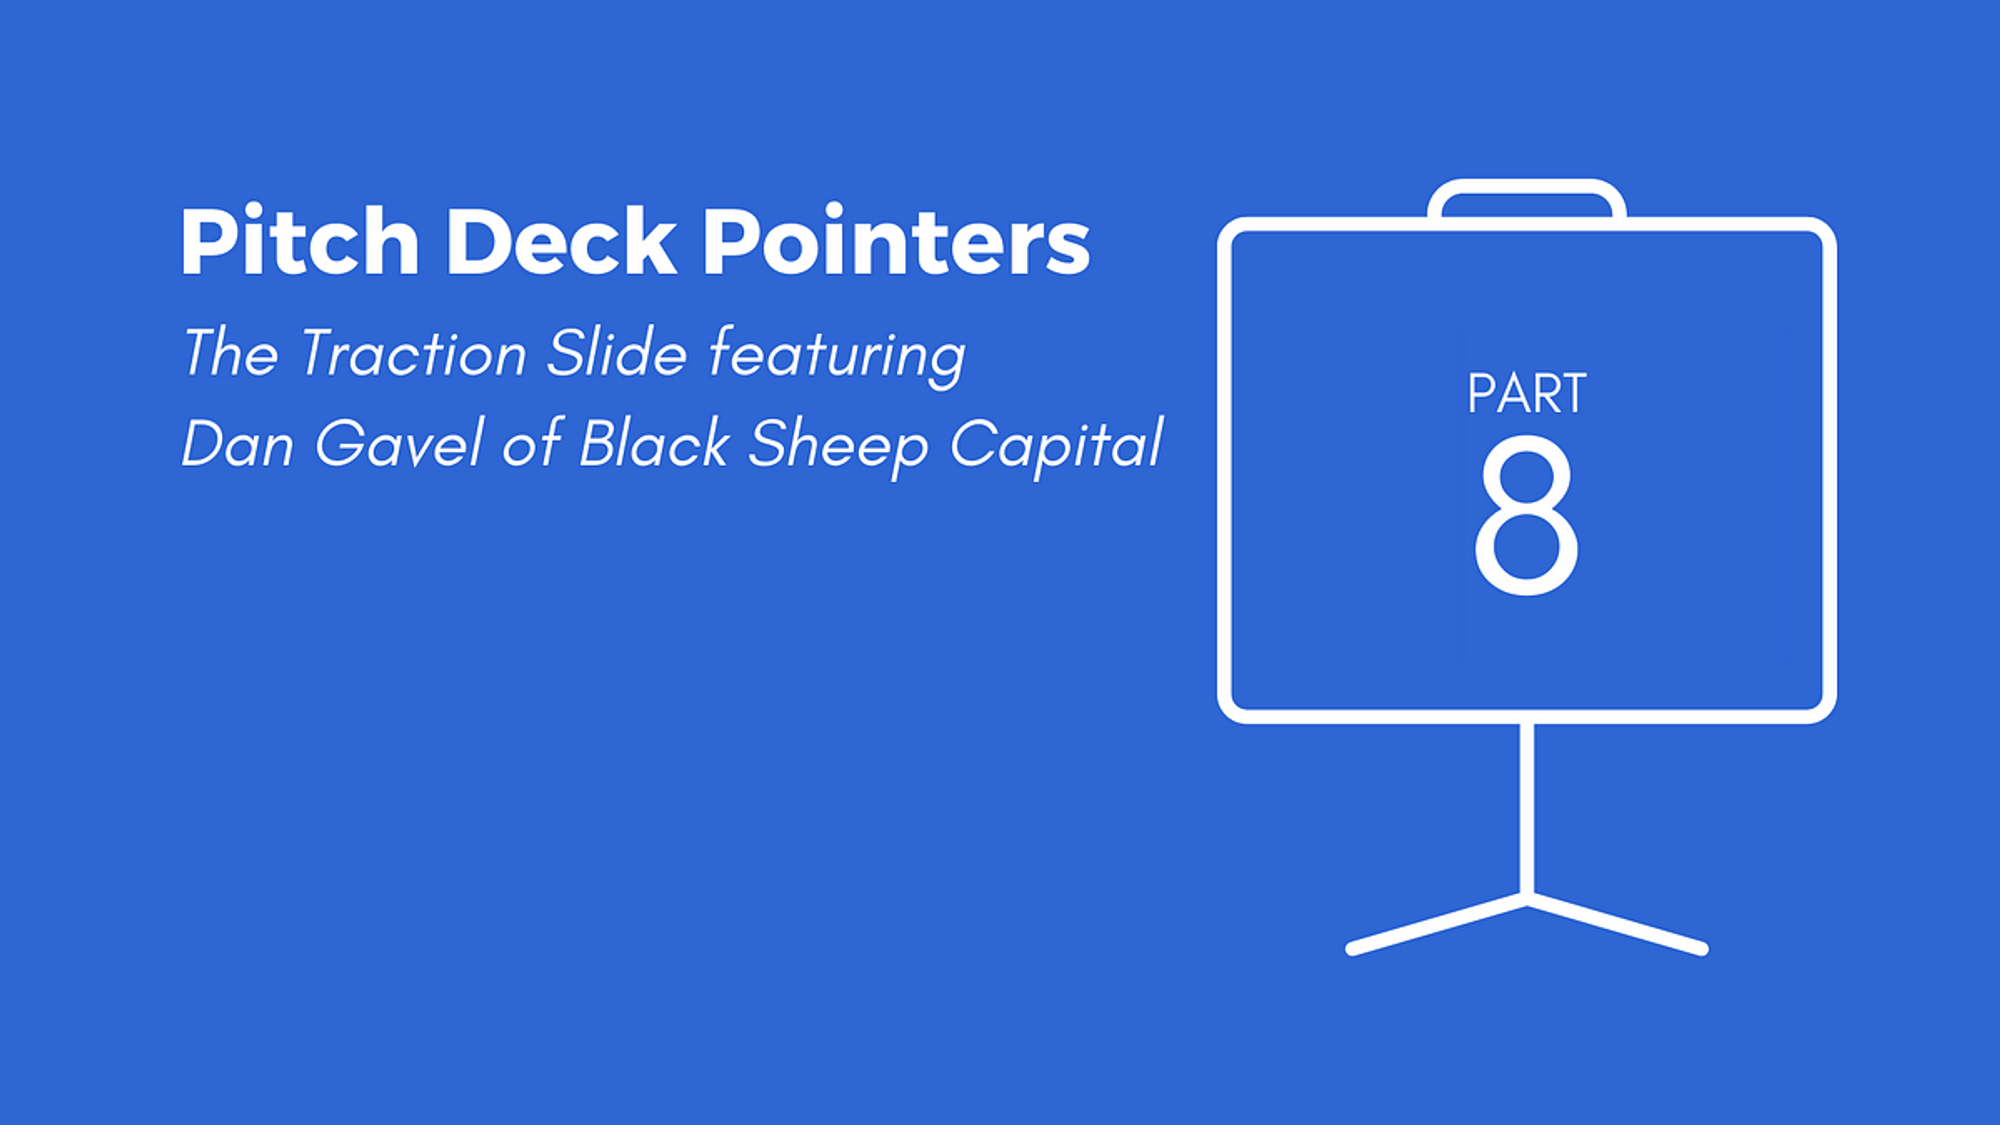 Pitch Deck Pointers Part 8: The Traction Slide